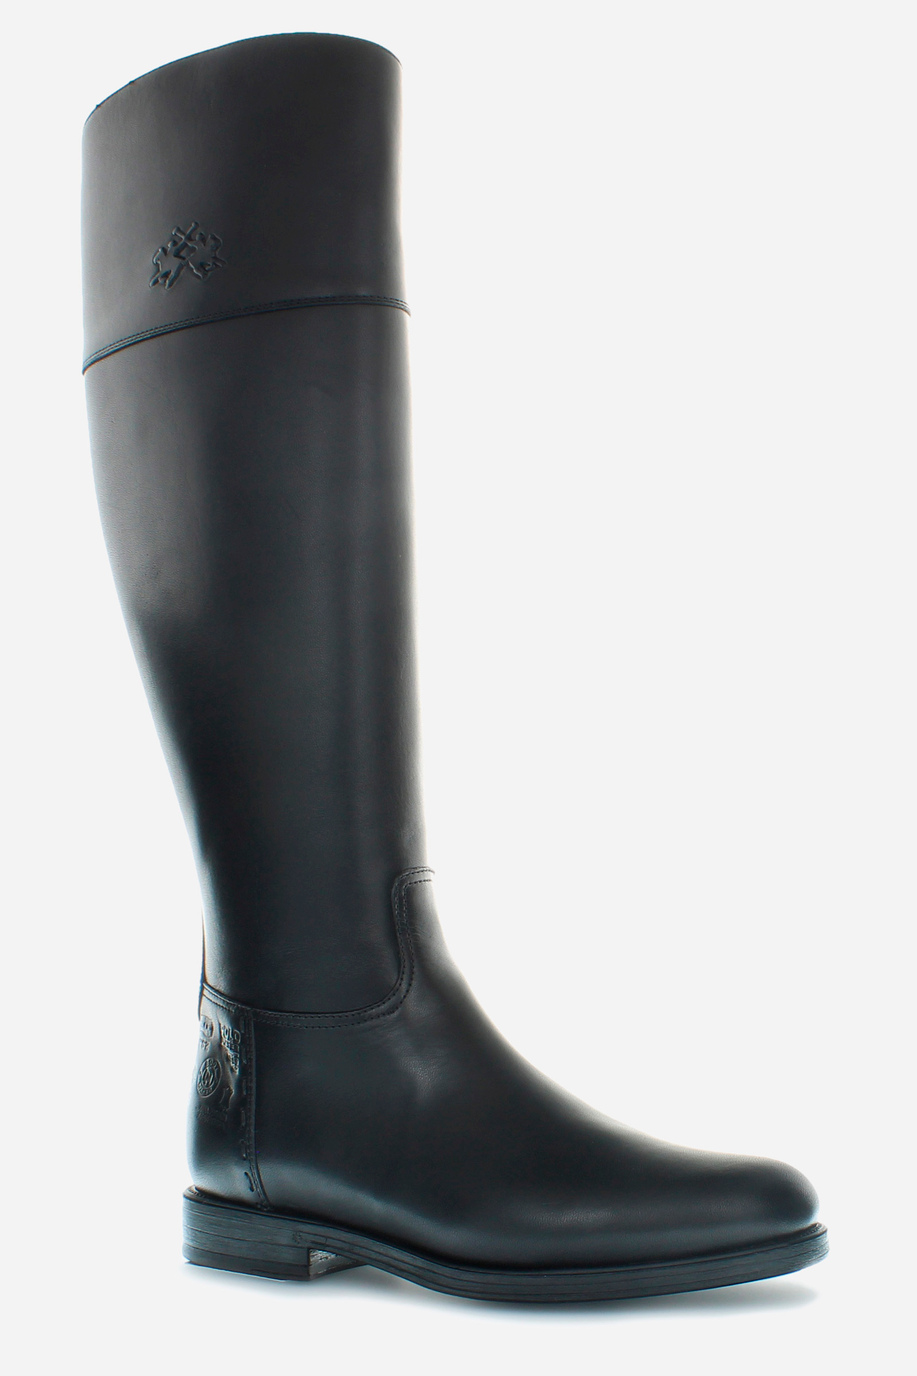 Women’s equestrian style leather boot - Footwear | La Martina - Official Online Shop